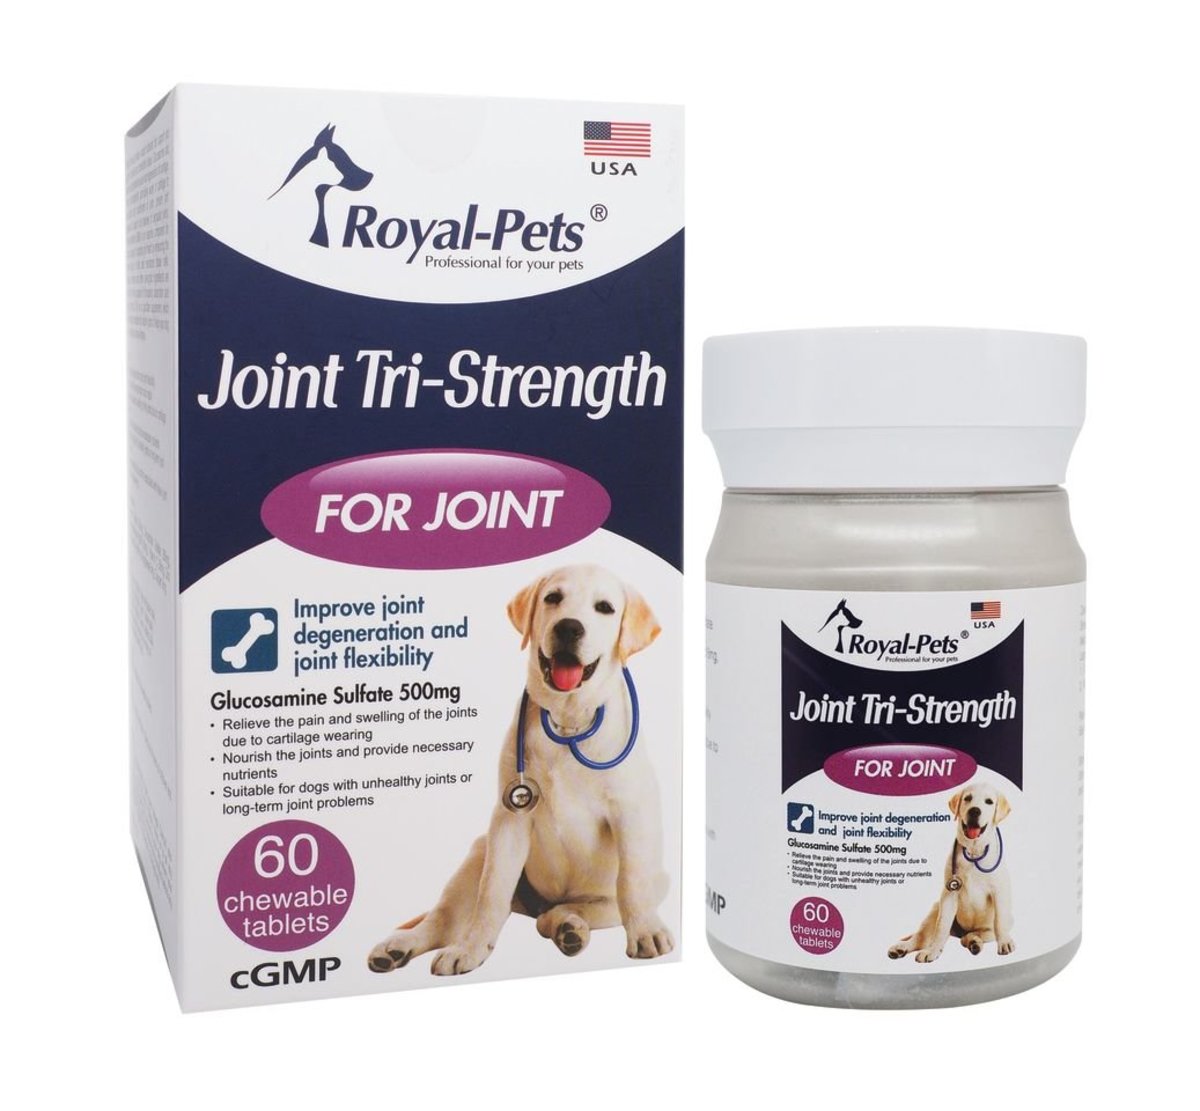 Joint Tri-strength (60 chewable tablets) 三效關節素 60粒咀嚼片